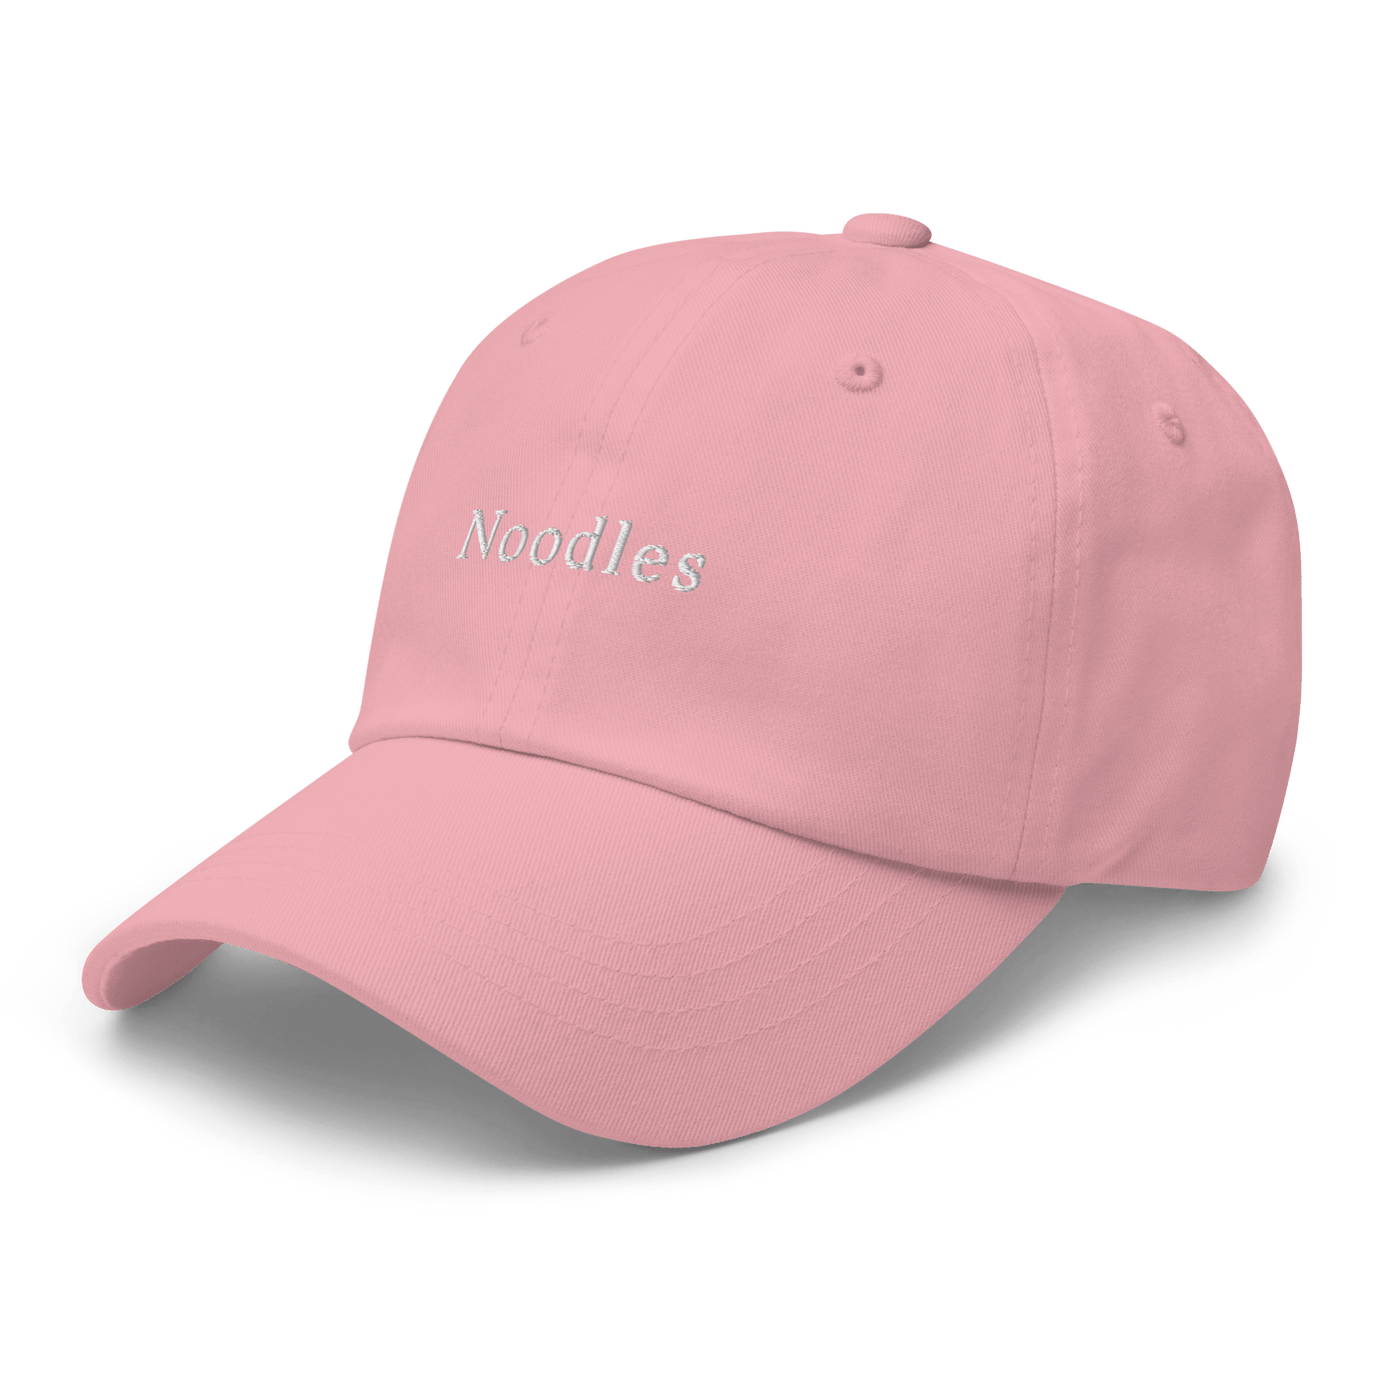 Noodles Dad hat - Pink - - Just Another Cap Store